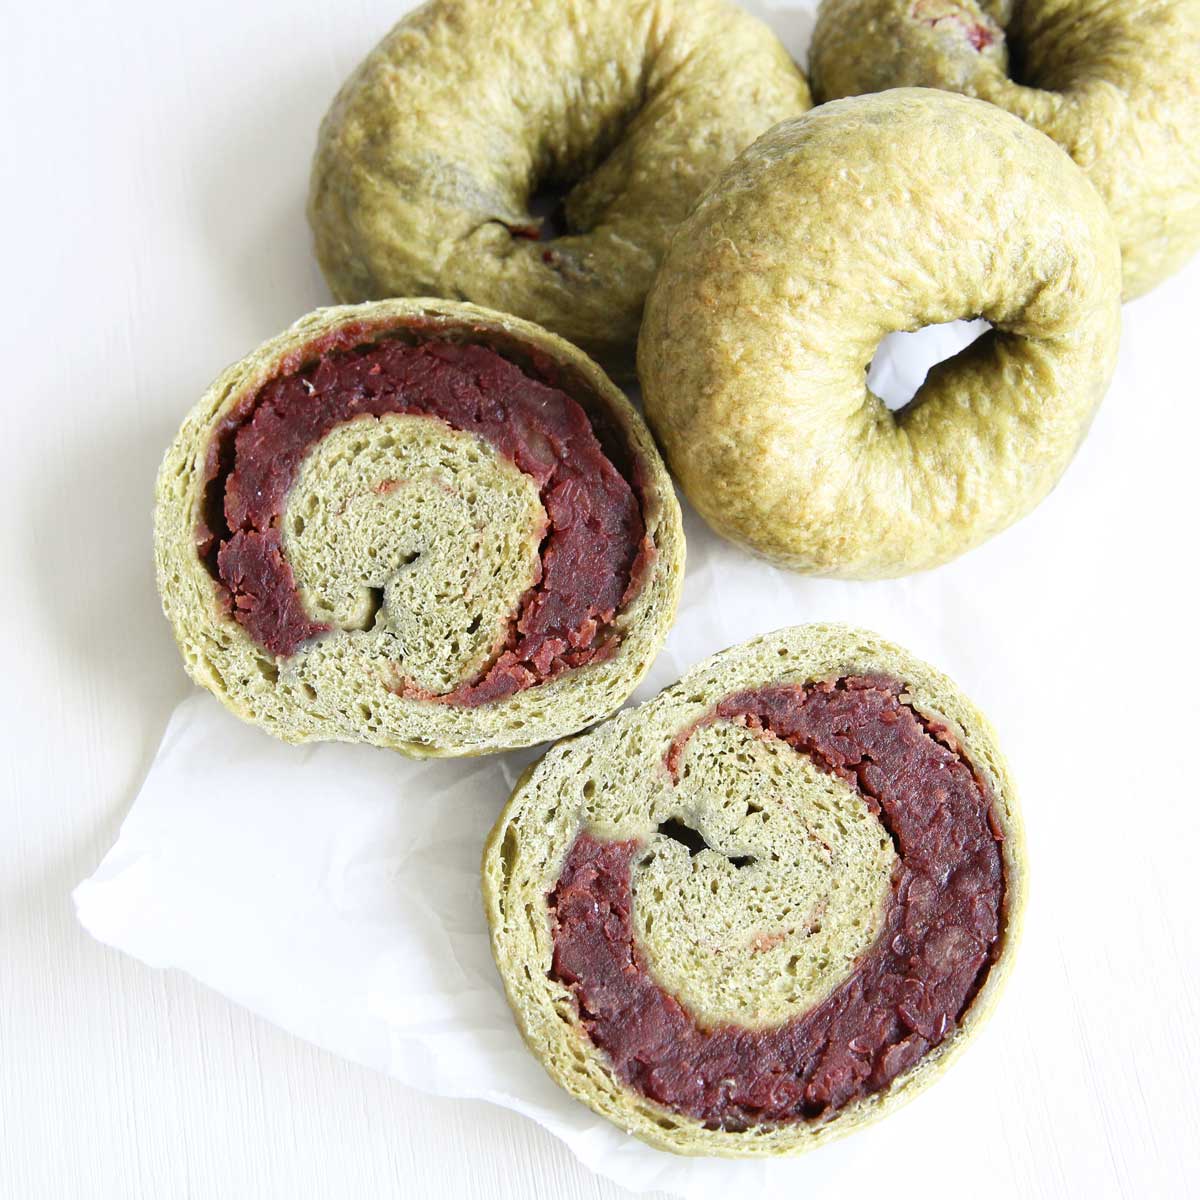 Homemade Applesauce Matcha Bagels with Red Bean Paste Filling - Nutella Stuffed Banana